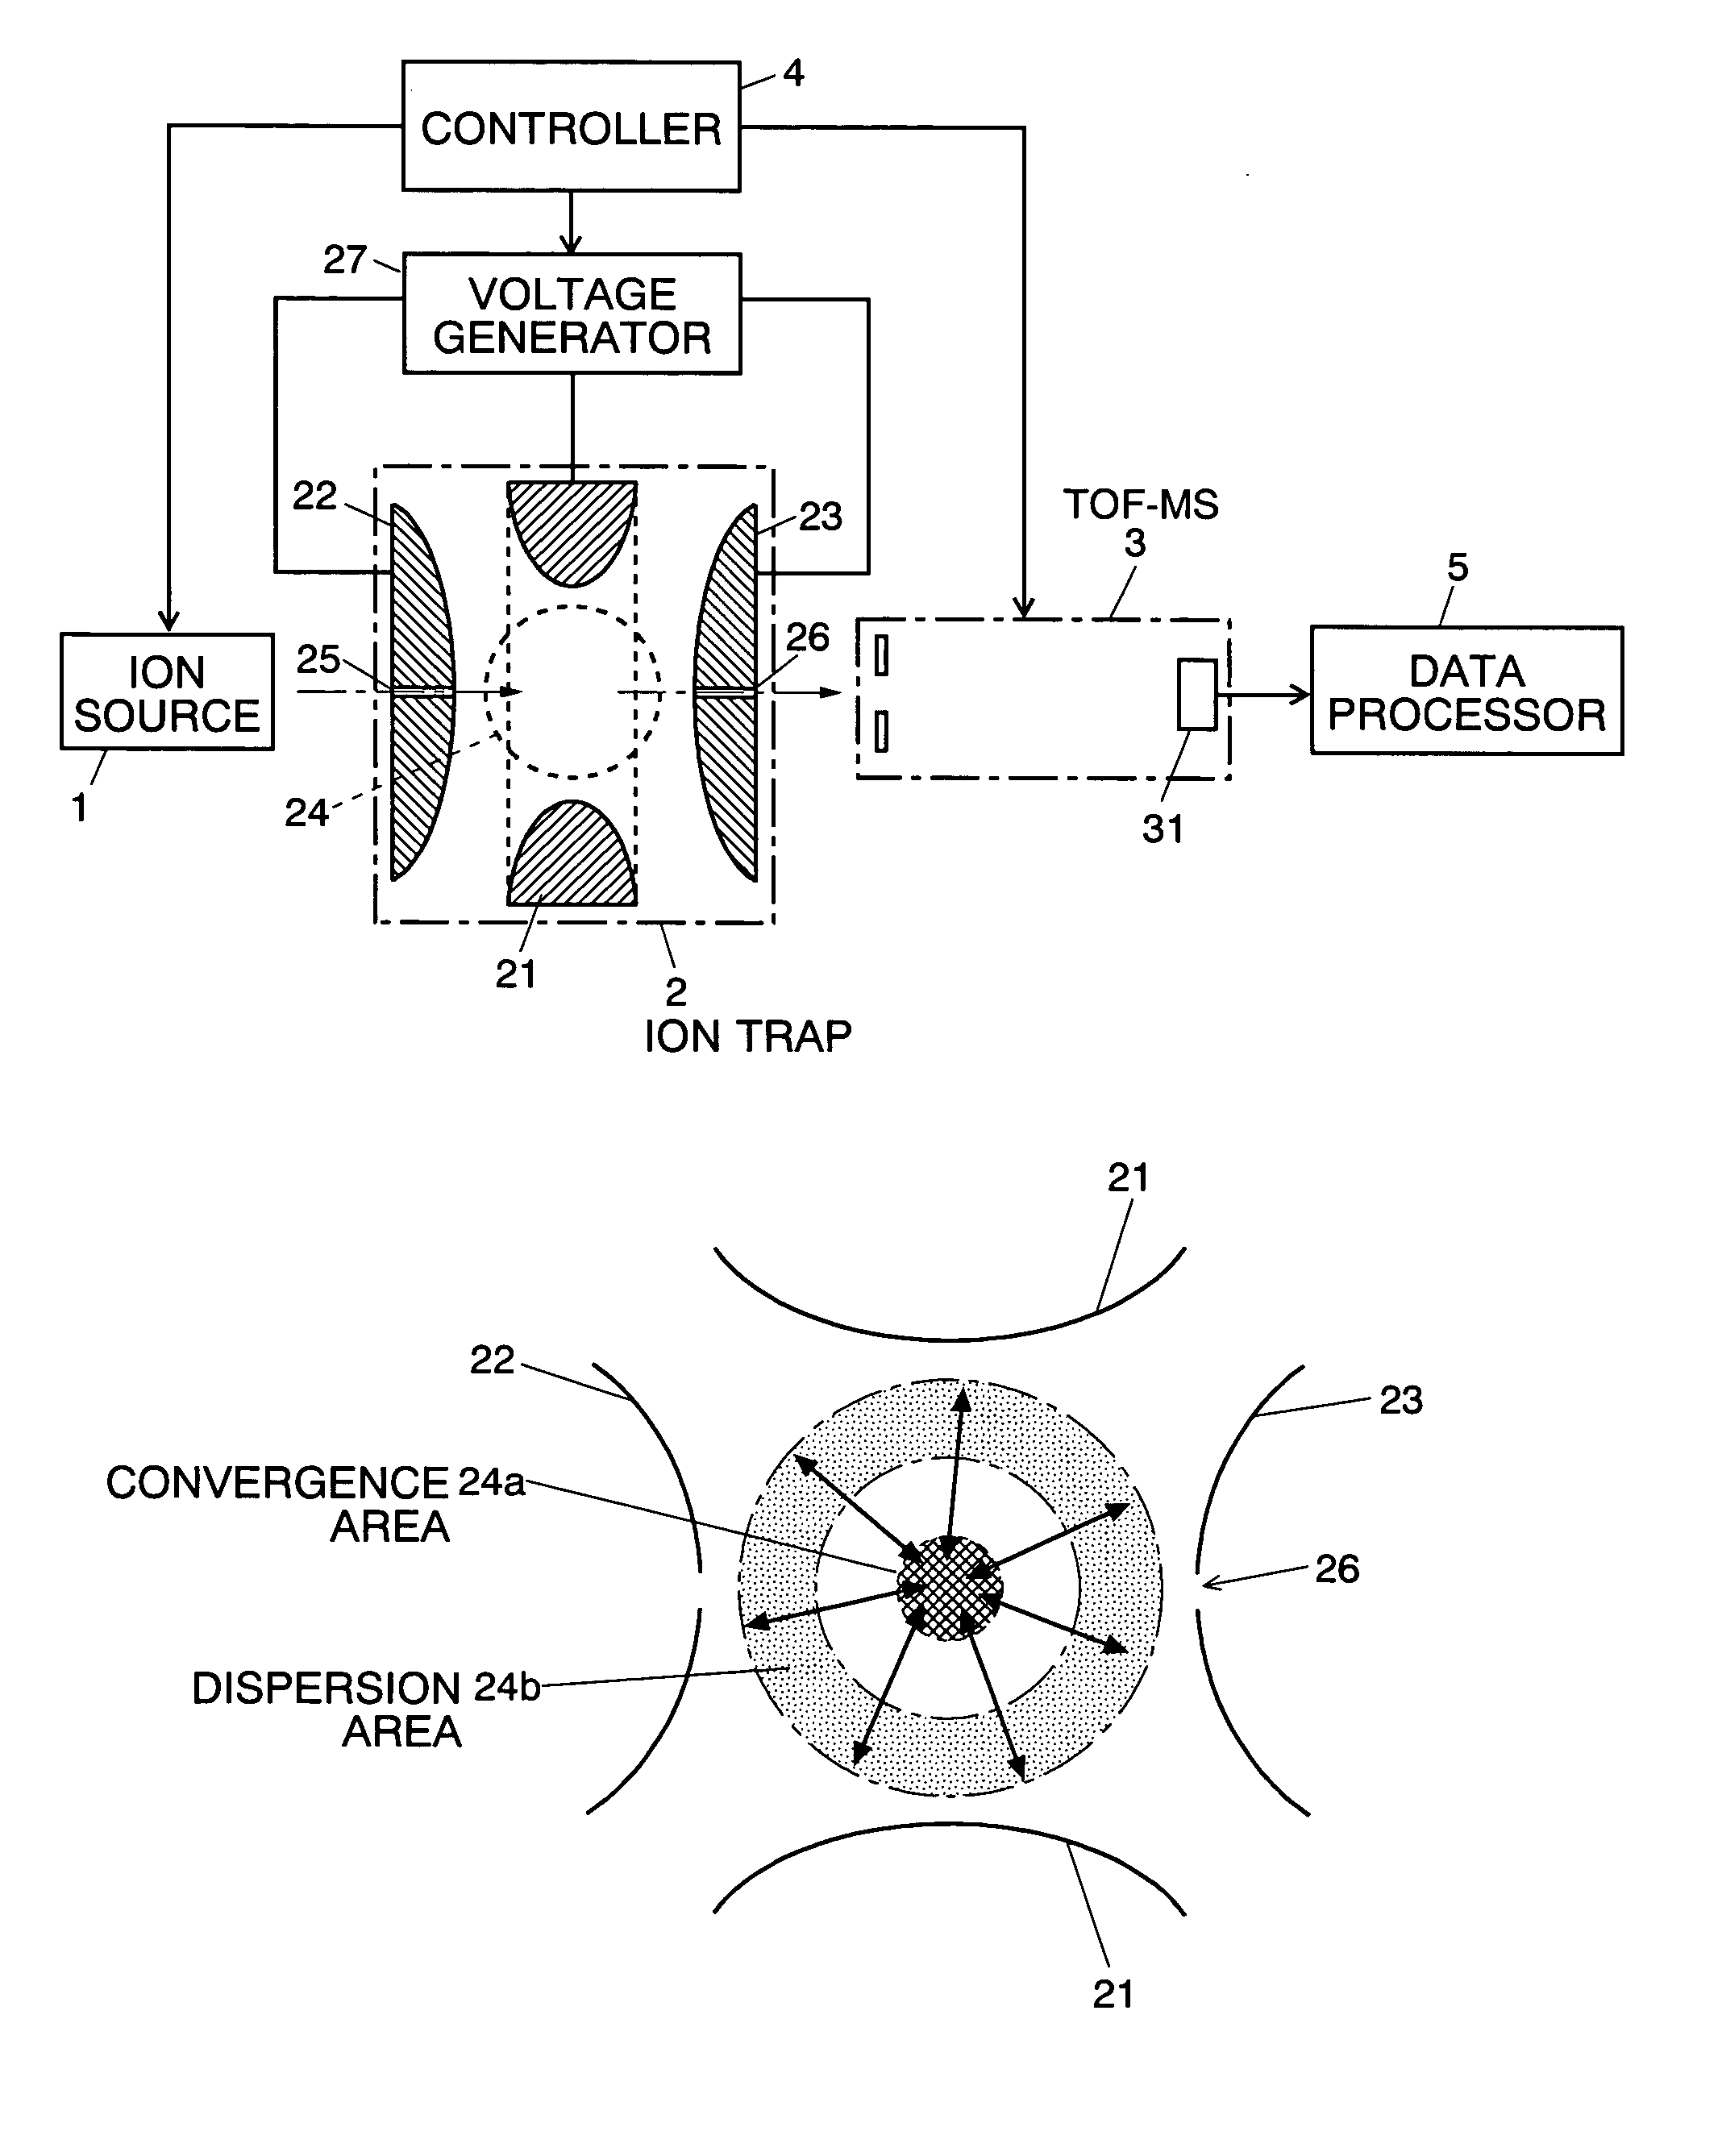 Mass spectrometer with an ion trap